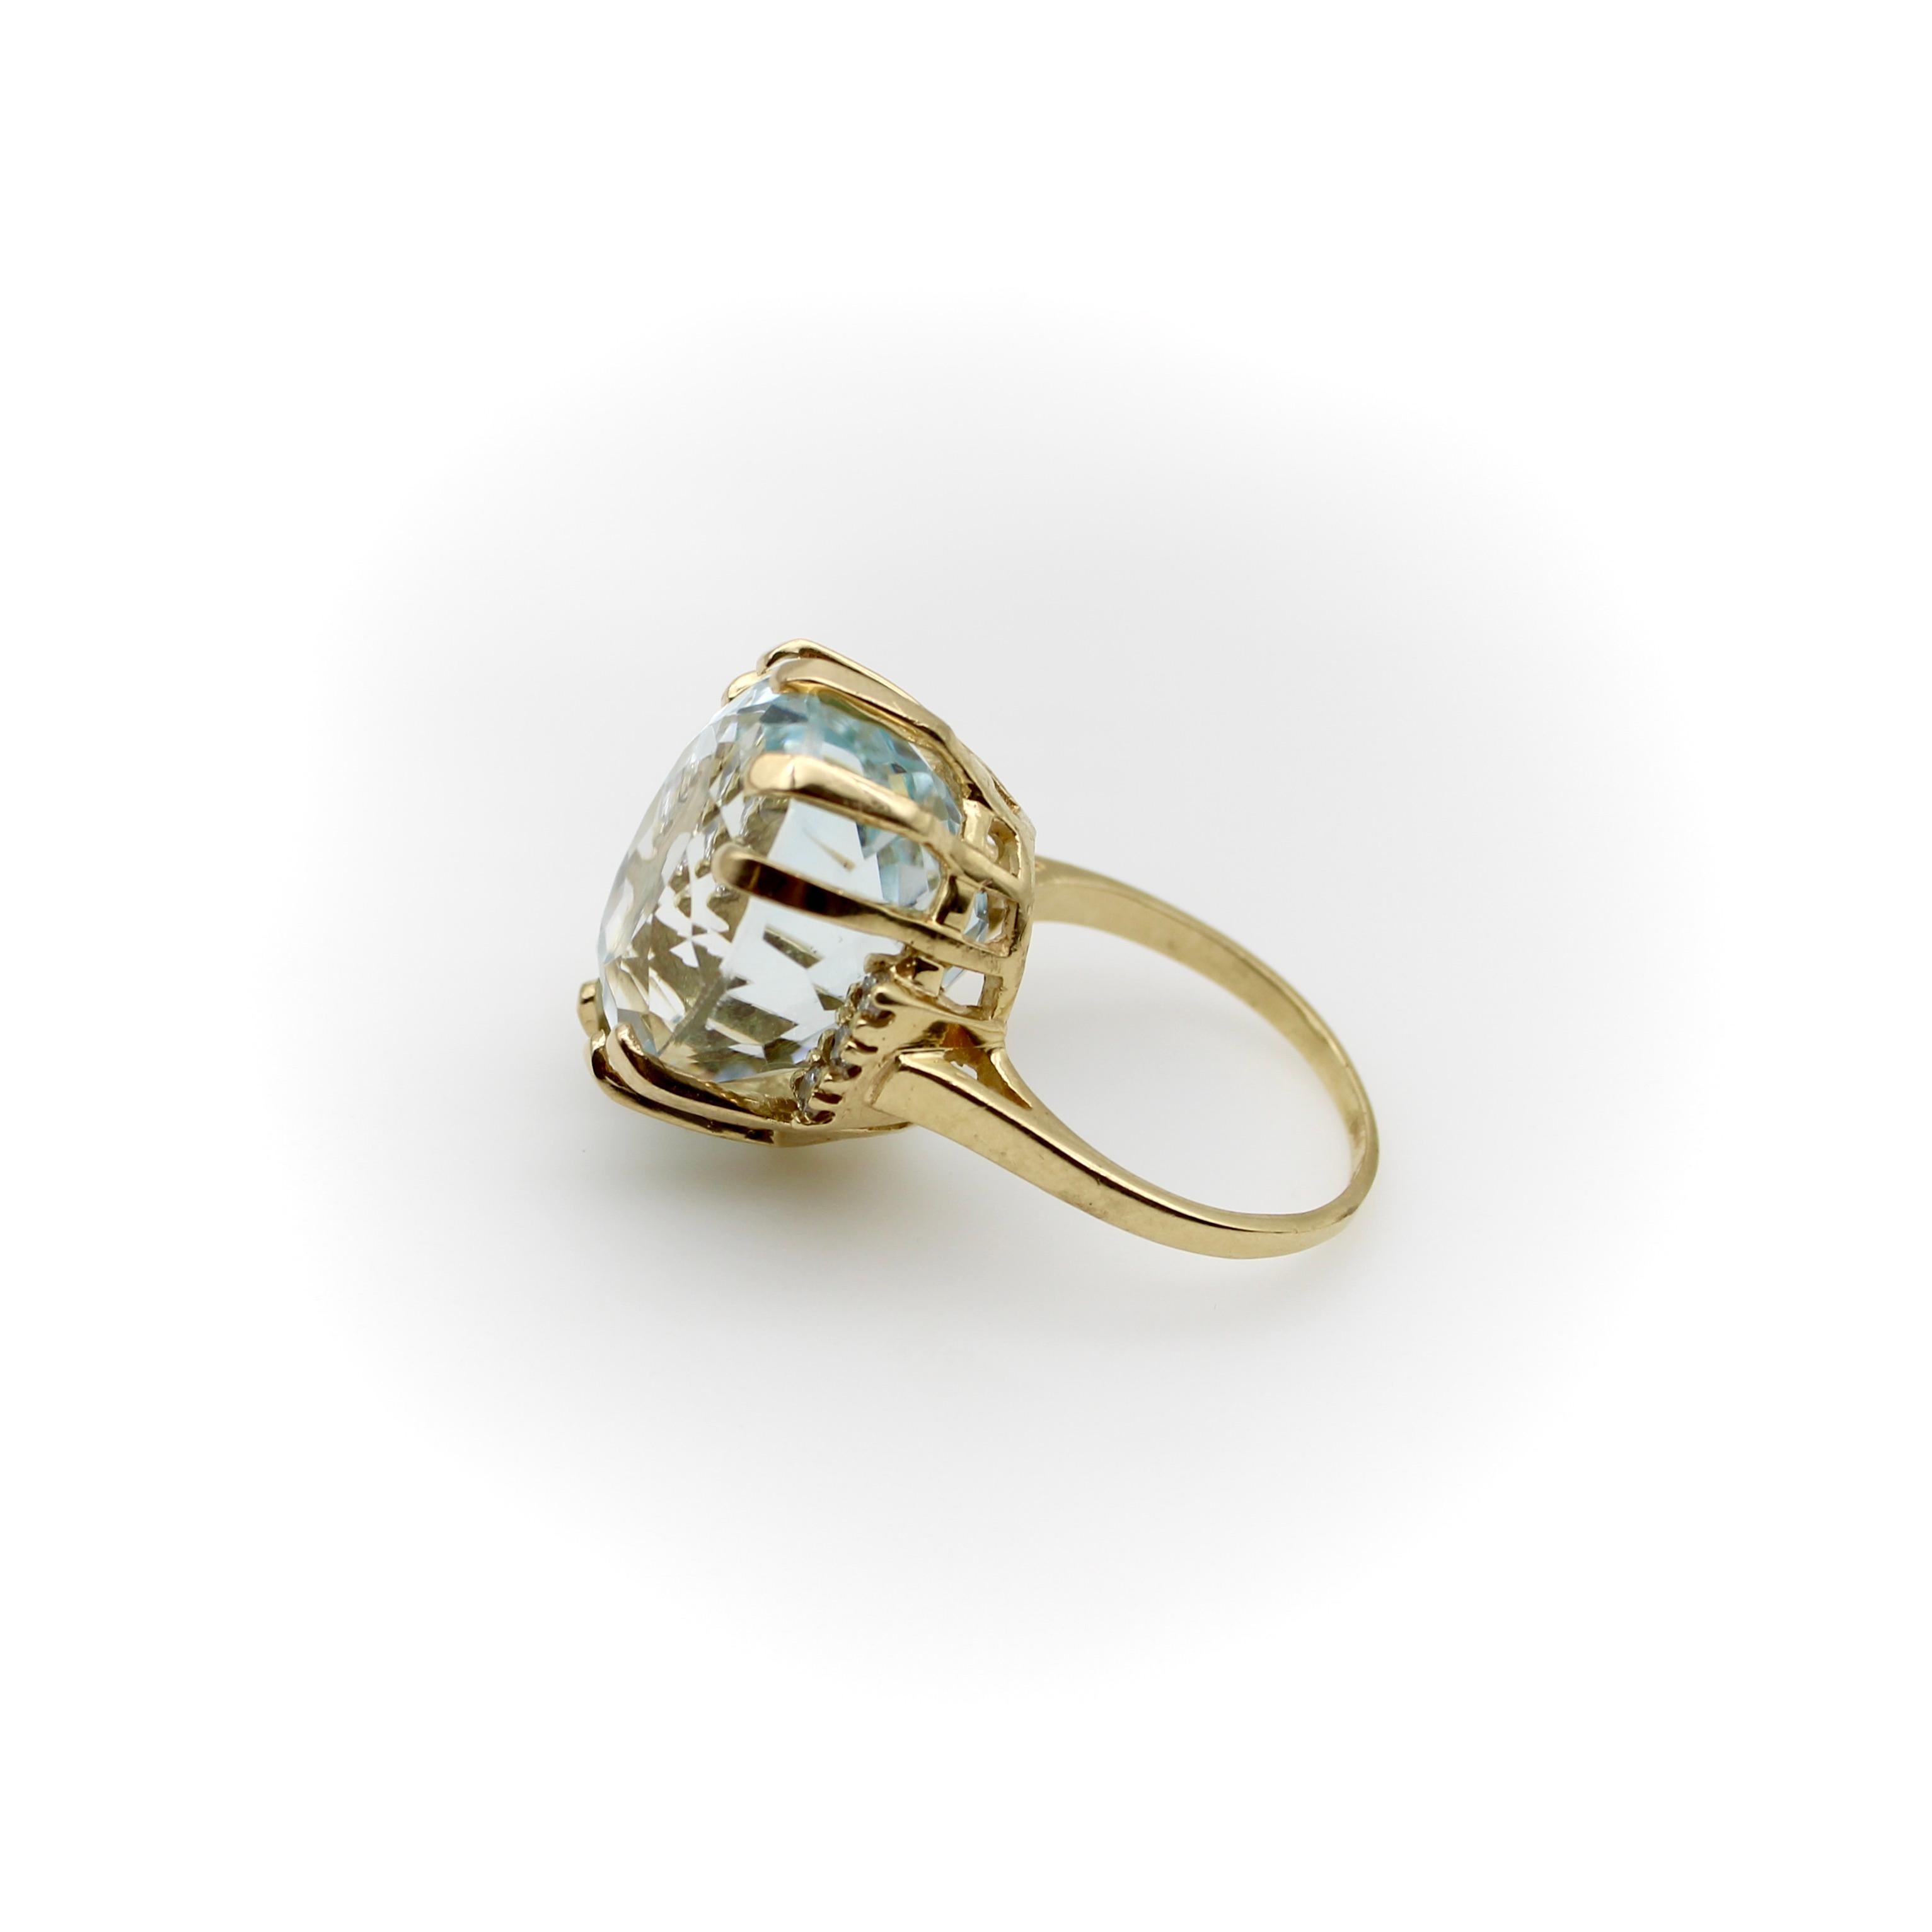 Vintage 14K Gold Aquamarine and Diamond Cocktail Ring In Good Condition For Sale In Venice, CA